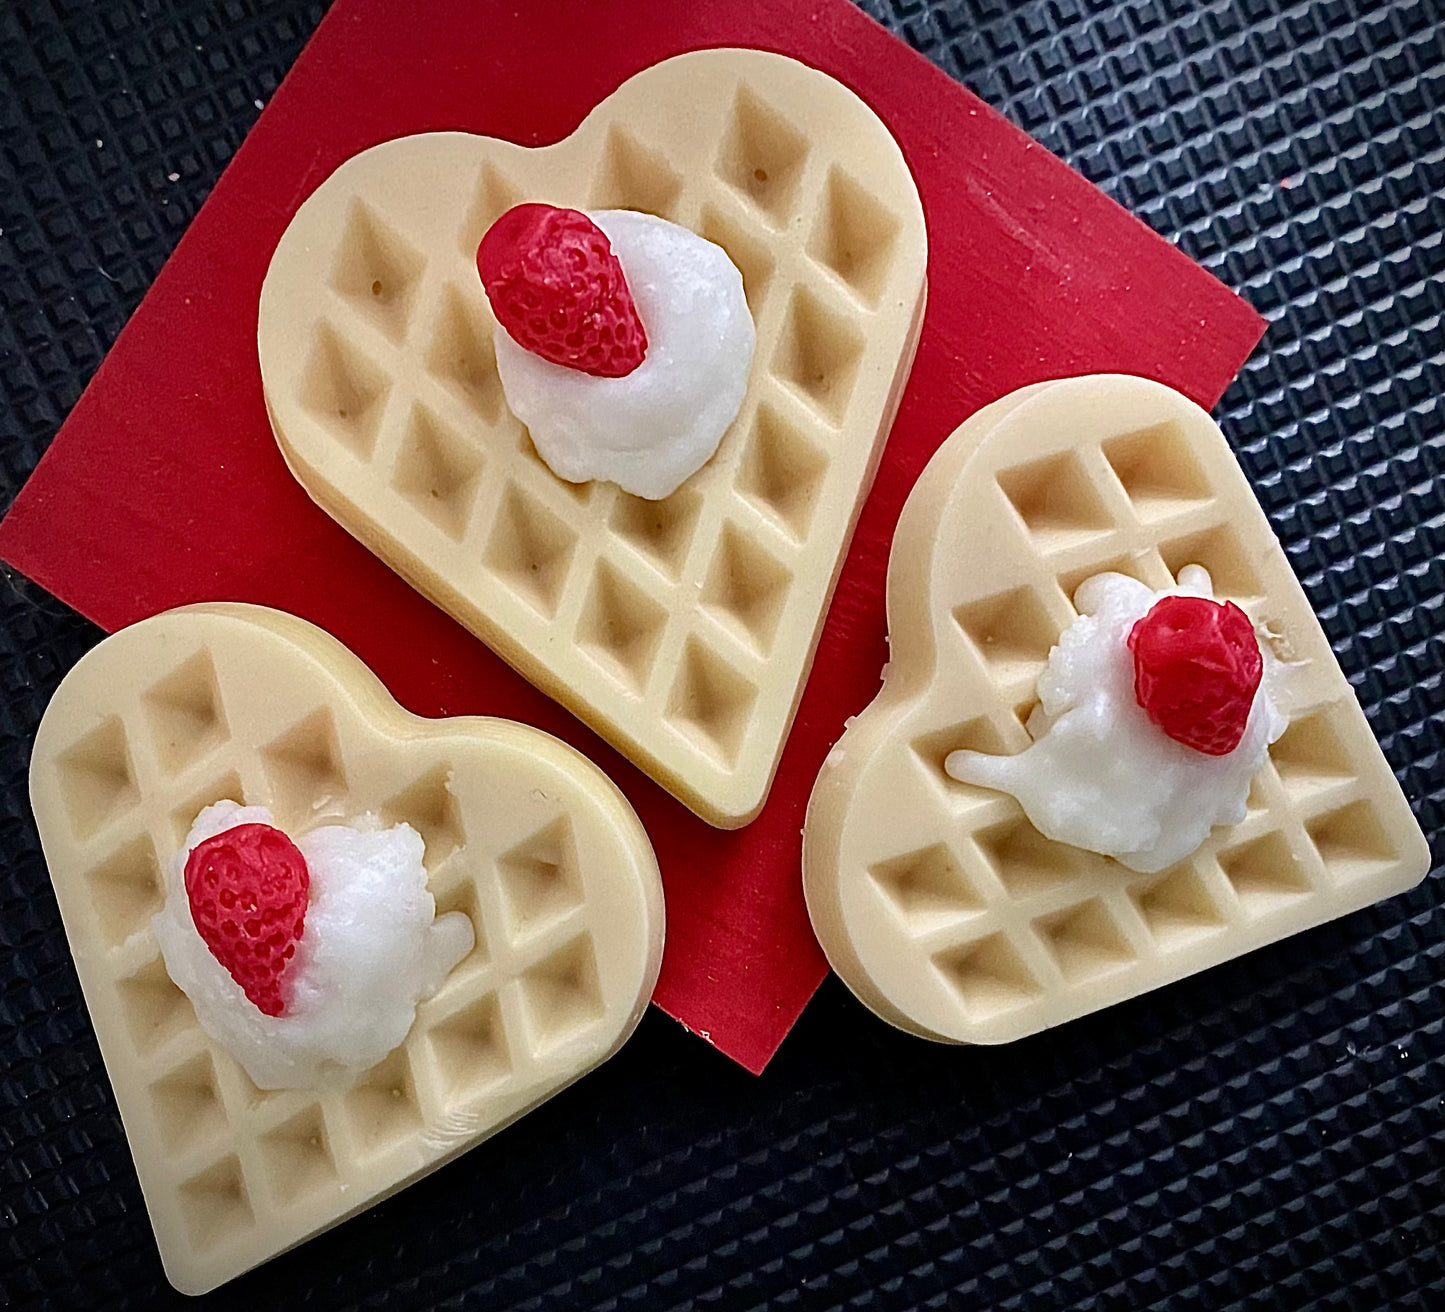 Strawberry CheesecakeWaffle Wax Melt with Vanilla Bean whipped topping and strawberry on top